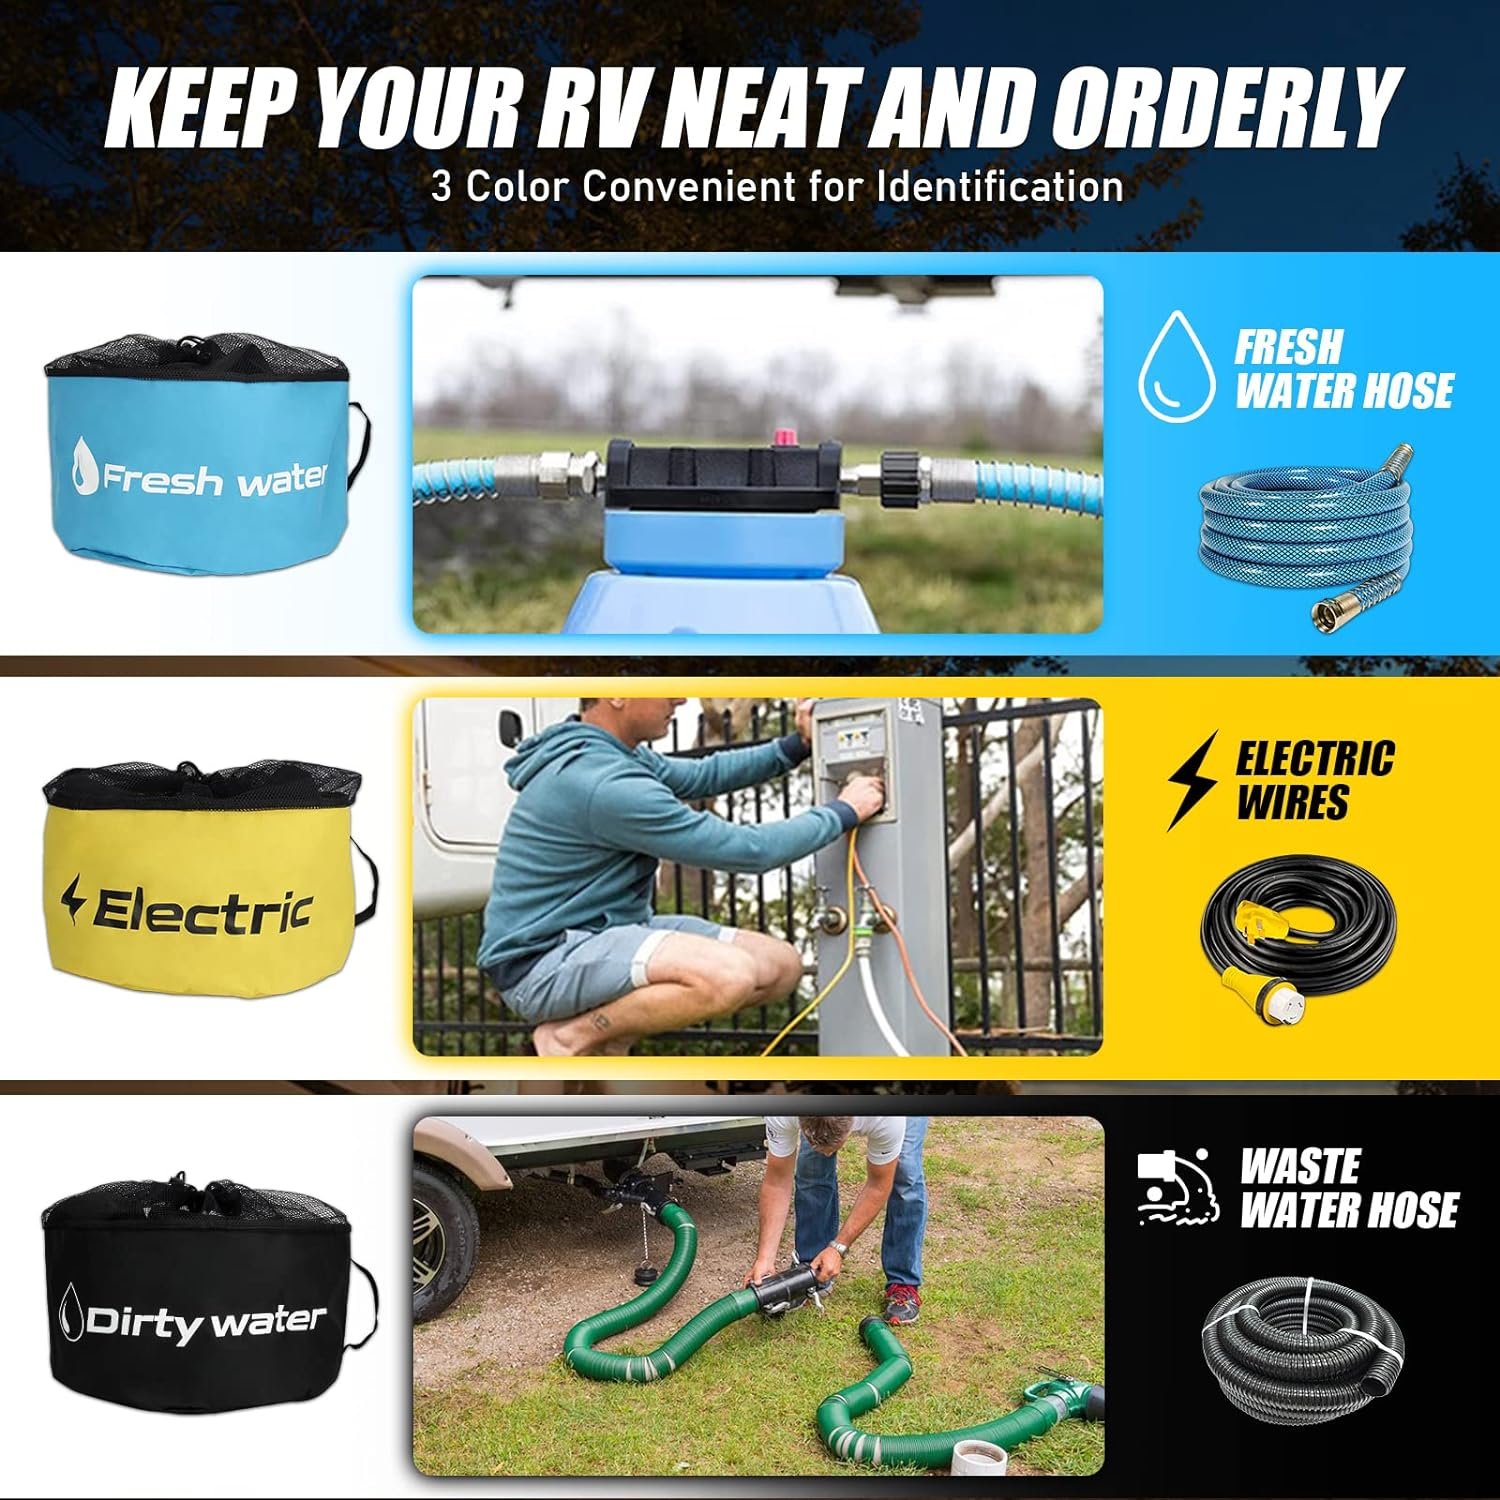 TIPHOPE RV Hose Bags Review